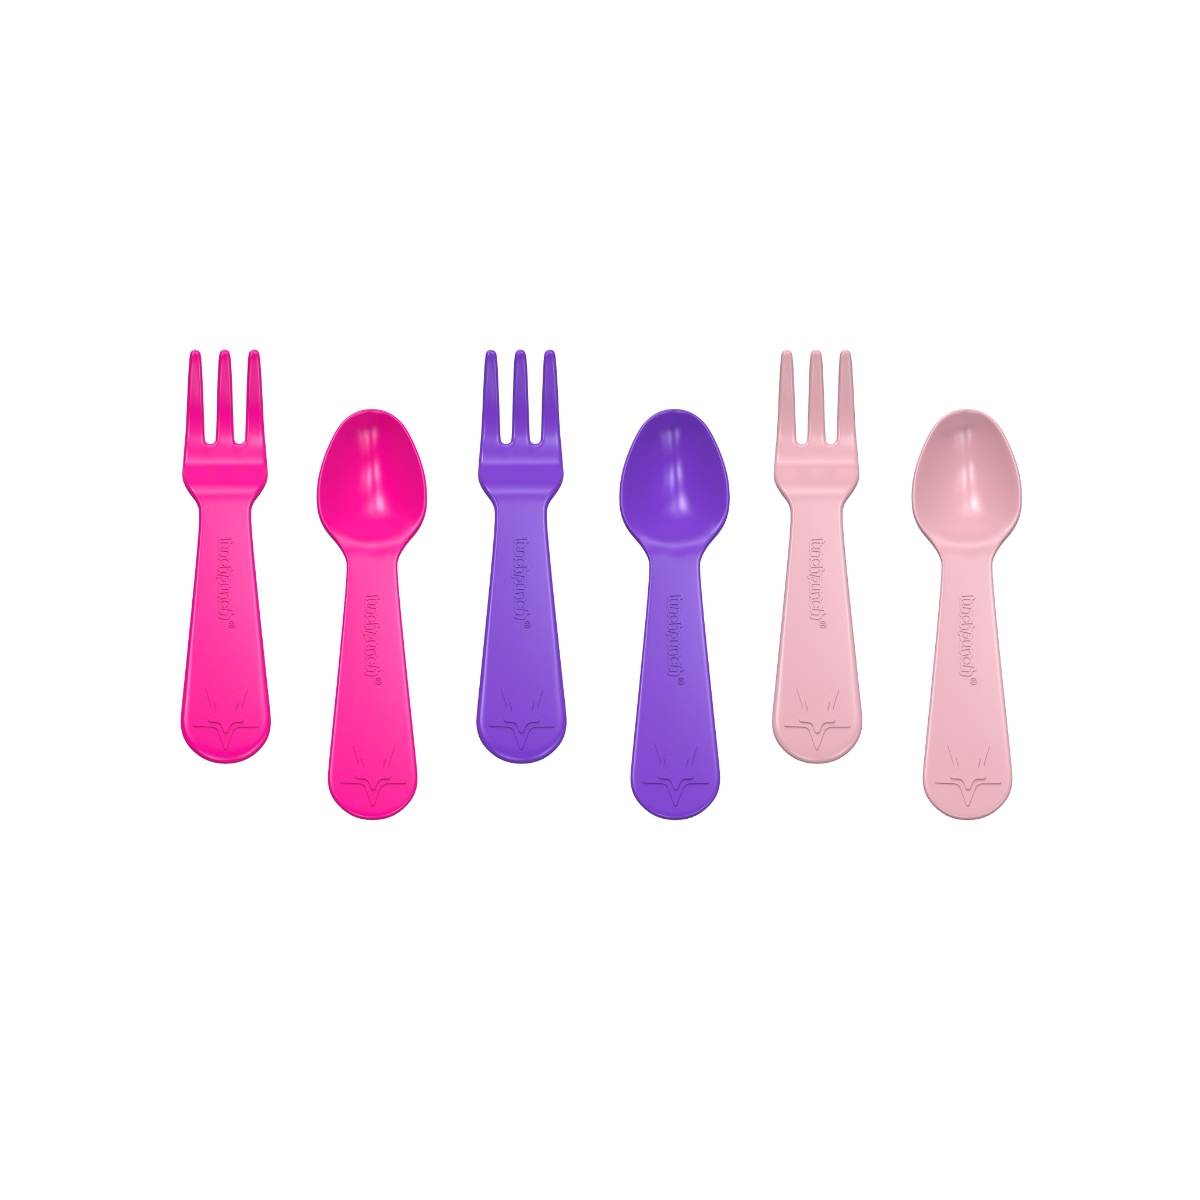 https://abclunchies.com/wp-content/uploads/2022/08/lunch-punch_fork-and-spoon-set_pink11.jpeg